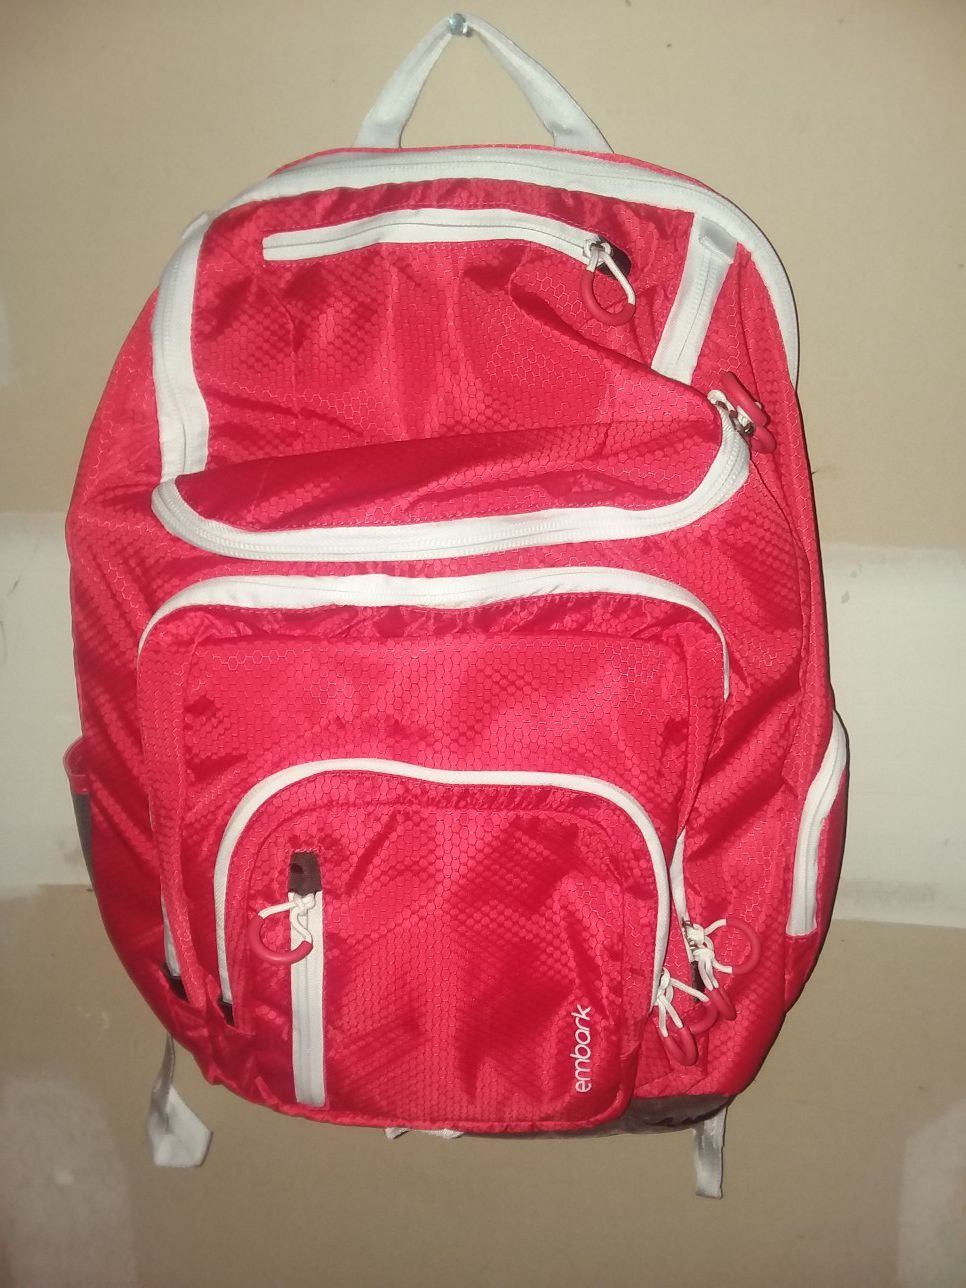 MAKE AN OFFER - embark Jartop Elite Red/Black/White Laptop Backpack - New Without Tags